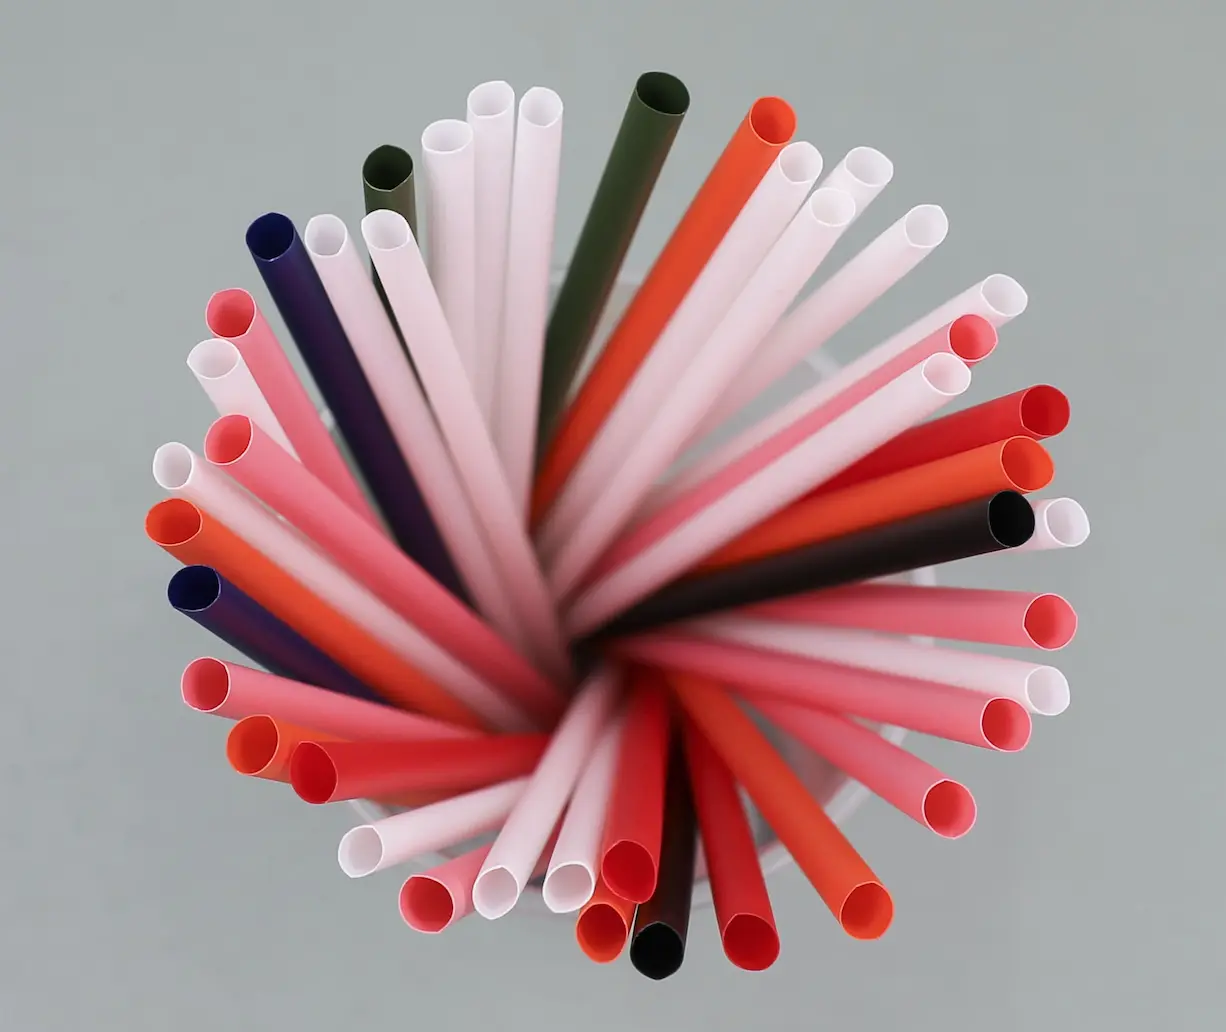 Discover the Environmental Advantages of Polylactic Acid Straws by GoodBioPak